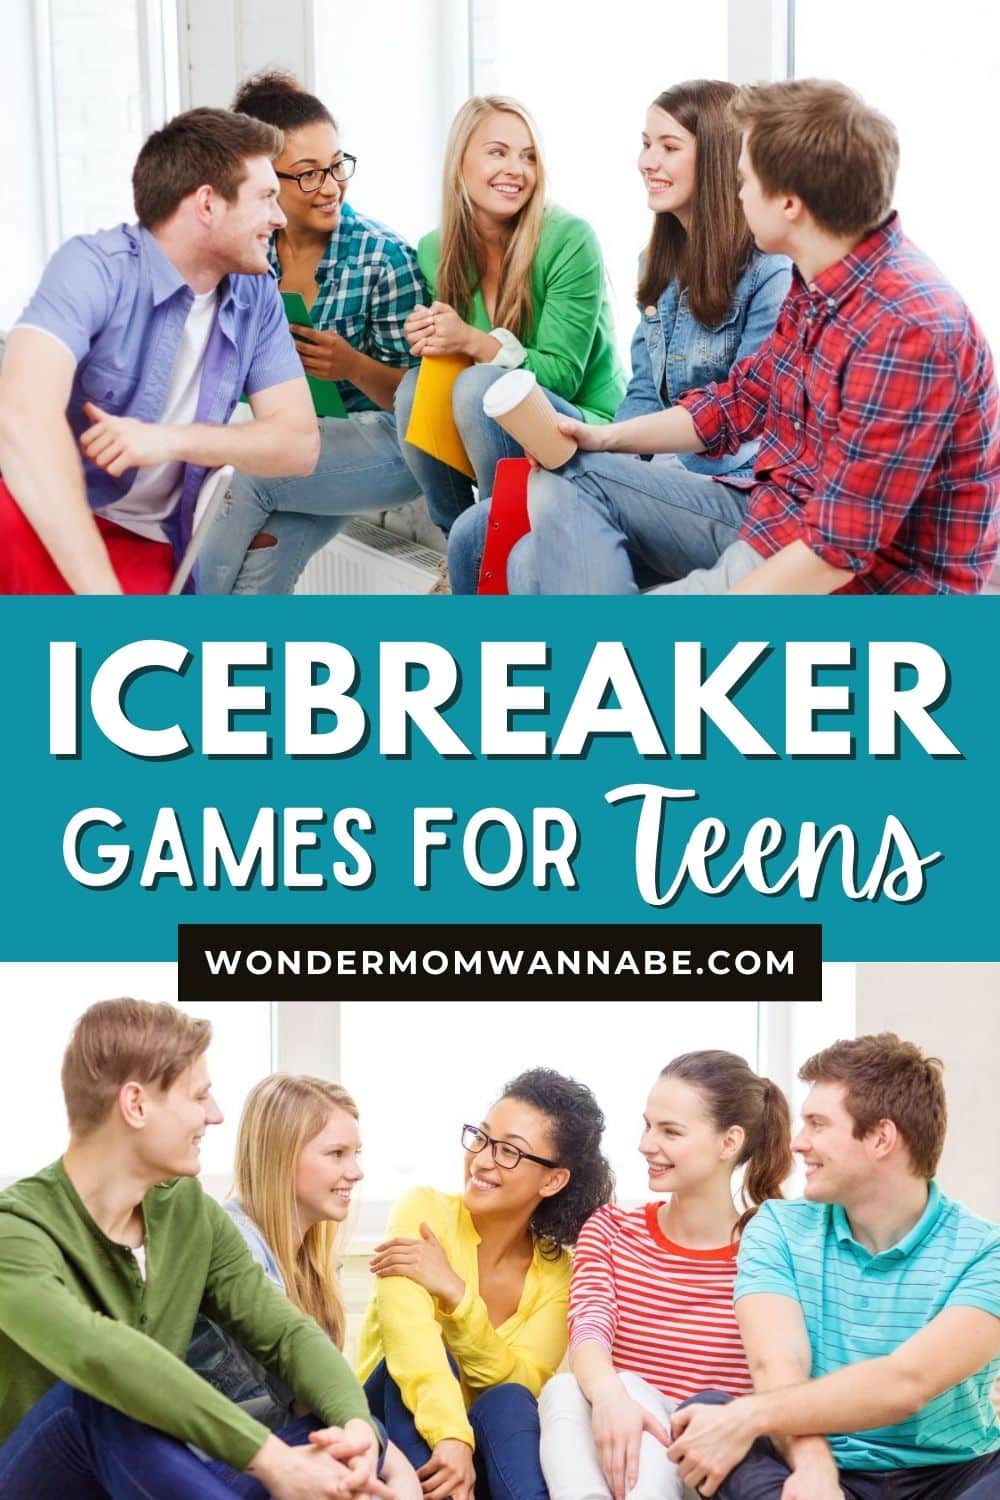 Icebreaker Games for Teens are a fantastic way to break the ice and facilitate connections among adolescents. These games are specifically designed to engage teenagers and create a fun and comfortable atmosphere for socializing. Whether it